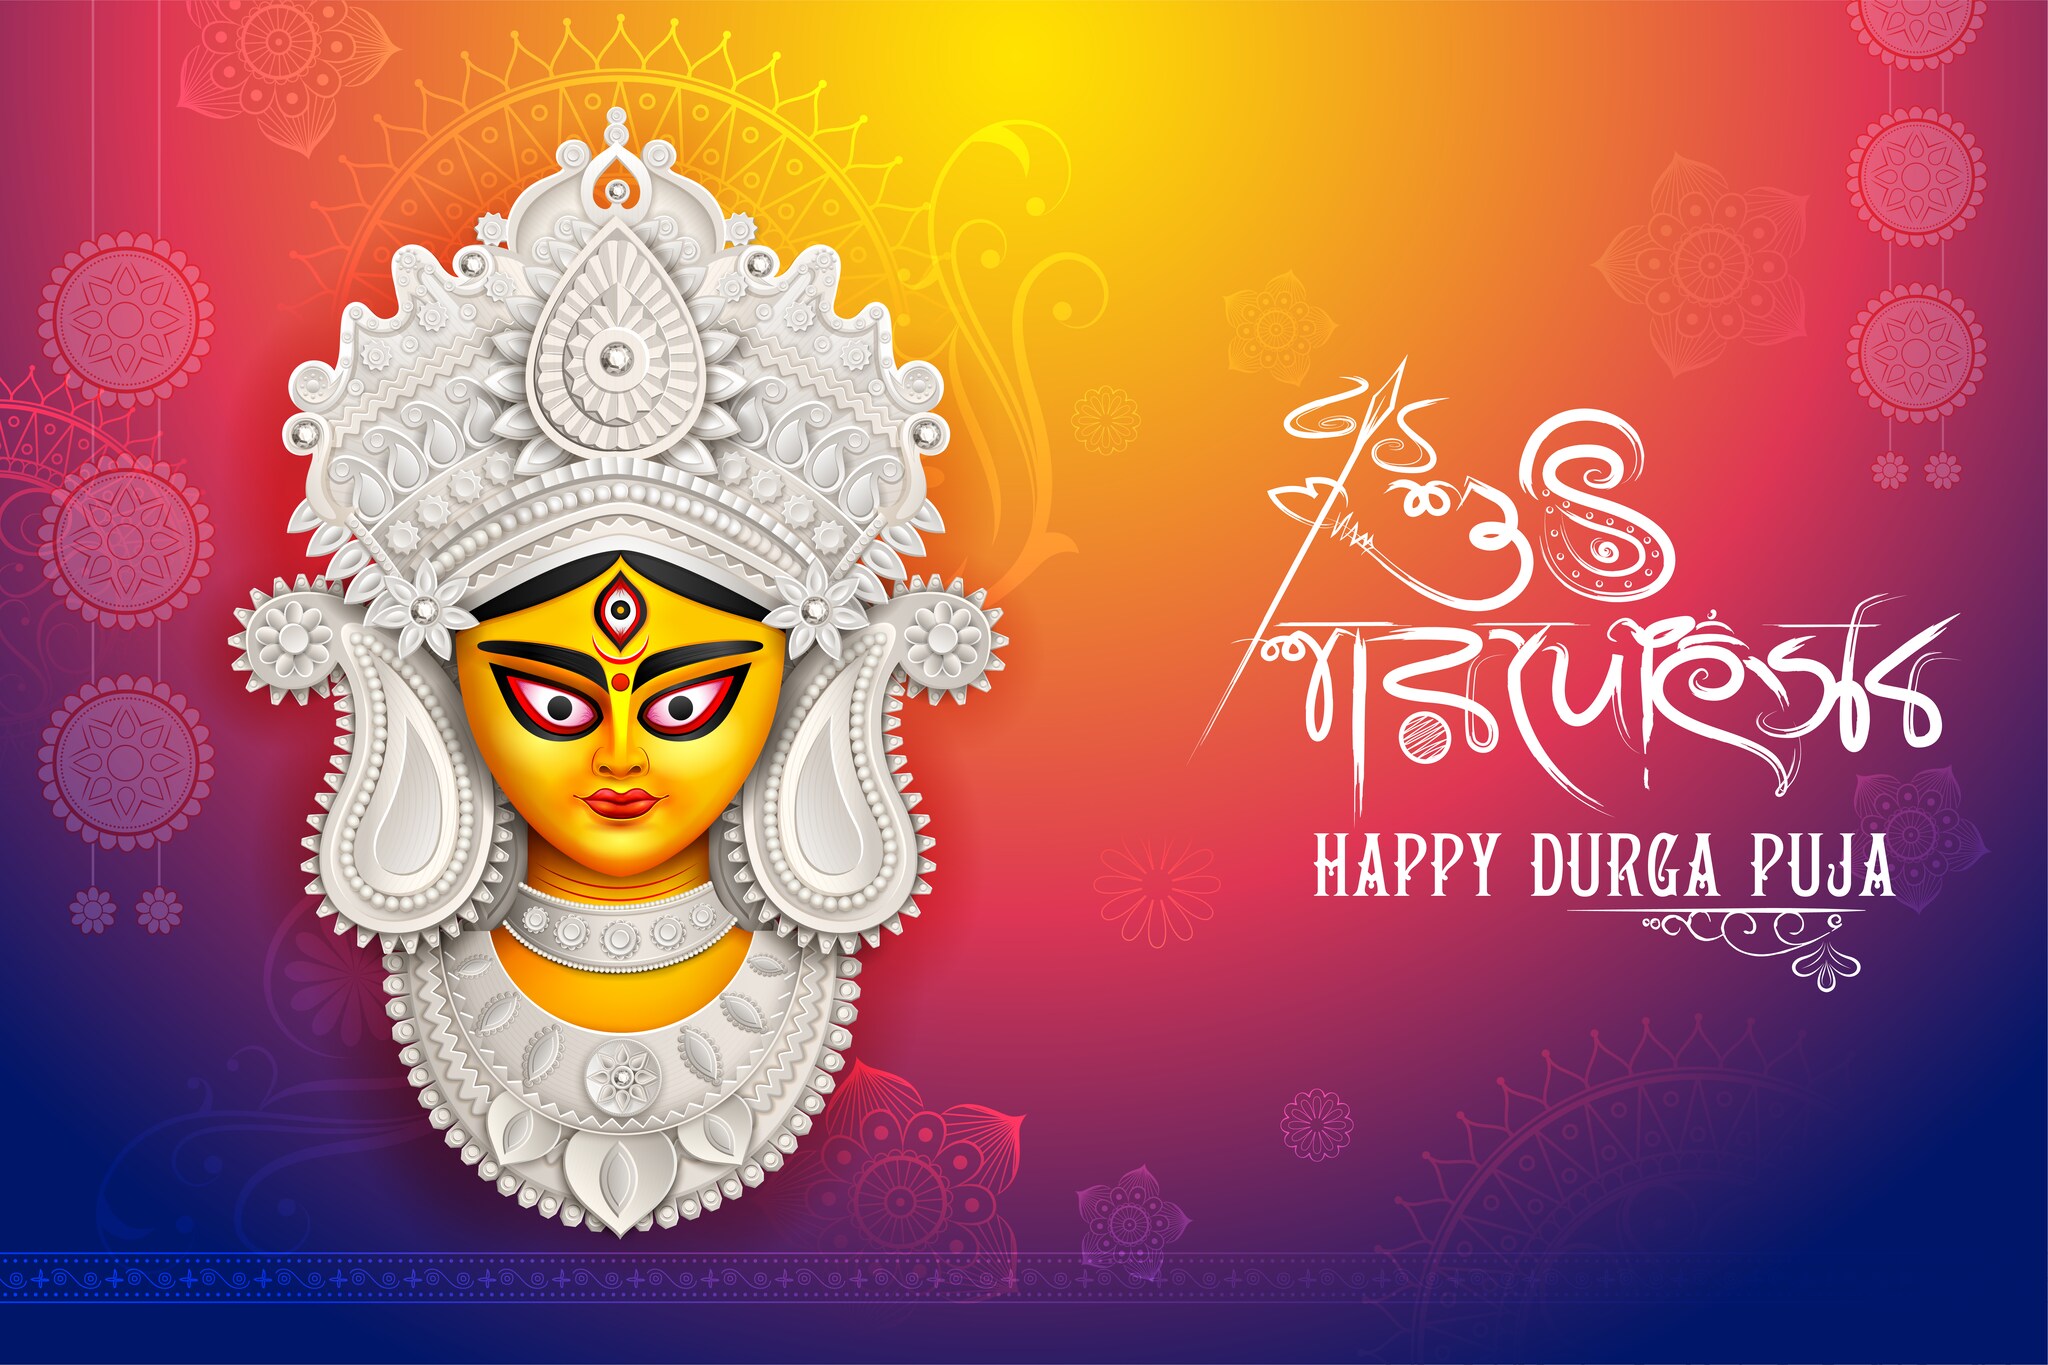 Happy Durga Puja 2022: Wishes Images, Wallpaper, Quotes, Status, Photos, Pics, SMS and Messages to share. (Image: Shutterstock)